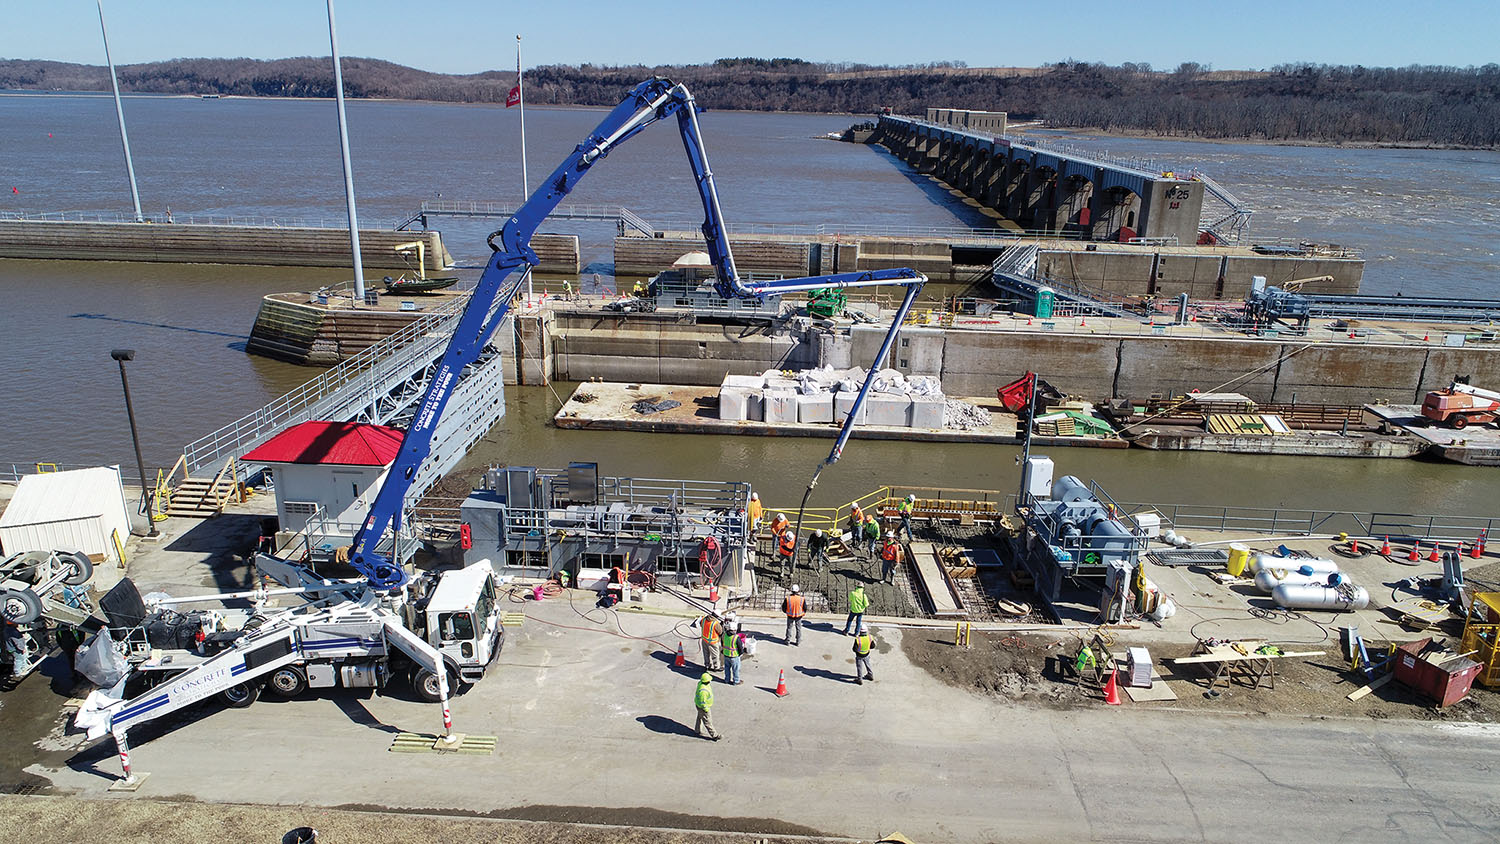 Massman Construction Company won the Build America award for its rehab work at Upper Mississippi Lock 25 (shown here) and Lock 24. (Photo courtesy of Massman Construction Company)